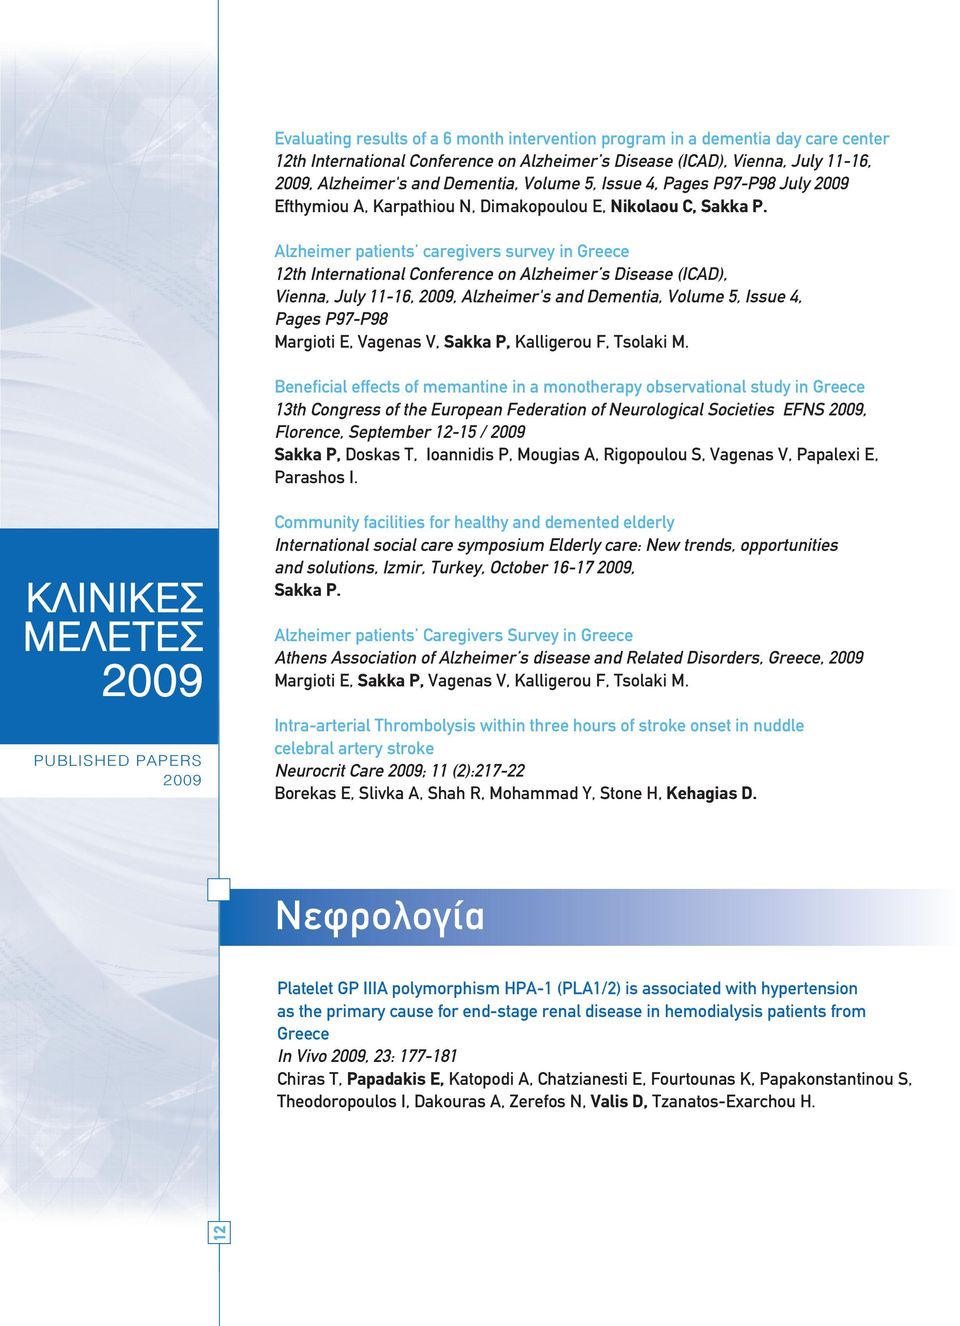 Alzheimer patients caregivers survey in Greece 12th International Conference on Alzheimer s Disease (ICAD), Vienna, July 11-16,, Alzheimer's and Dementia, Volume 5, Issue 4, Pages P97-P98 Margioti E,